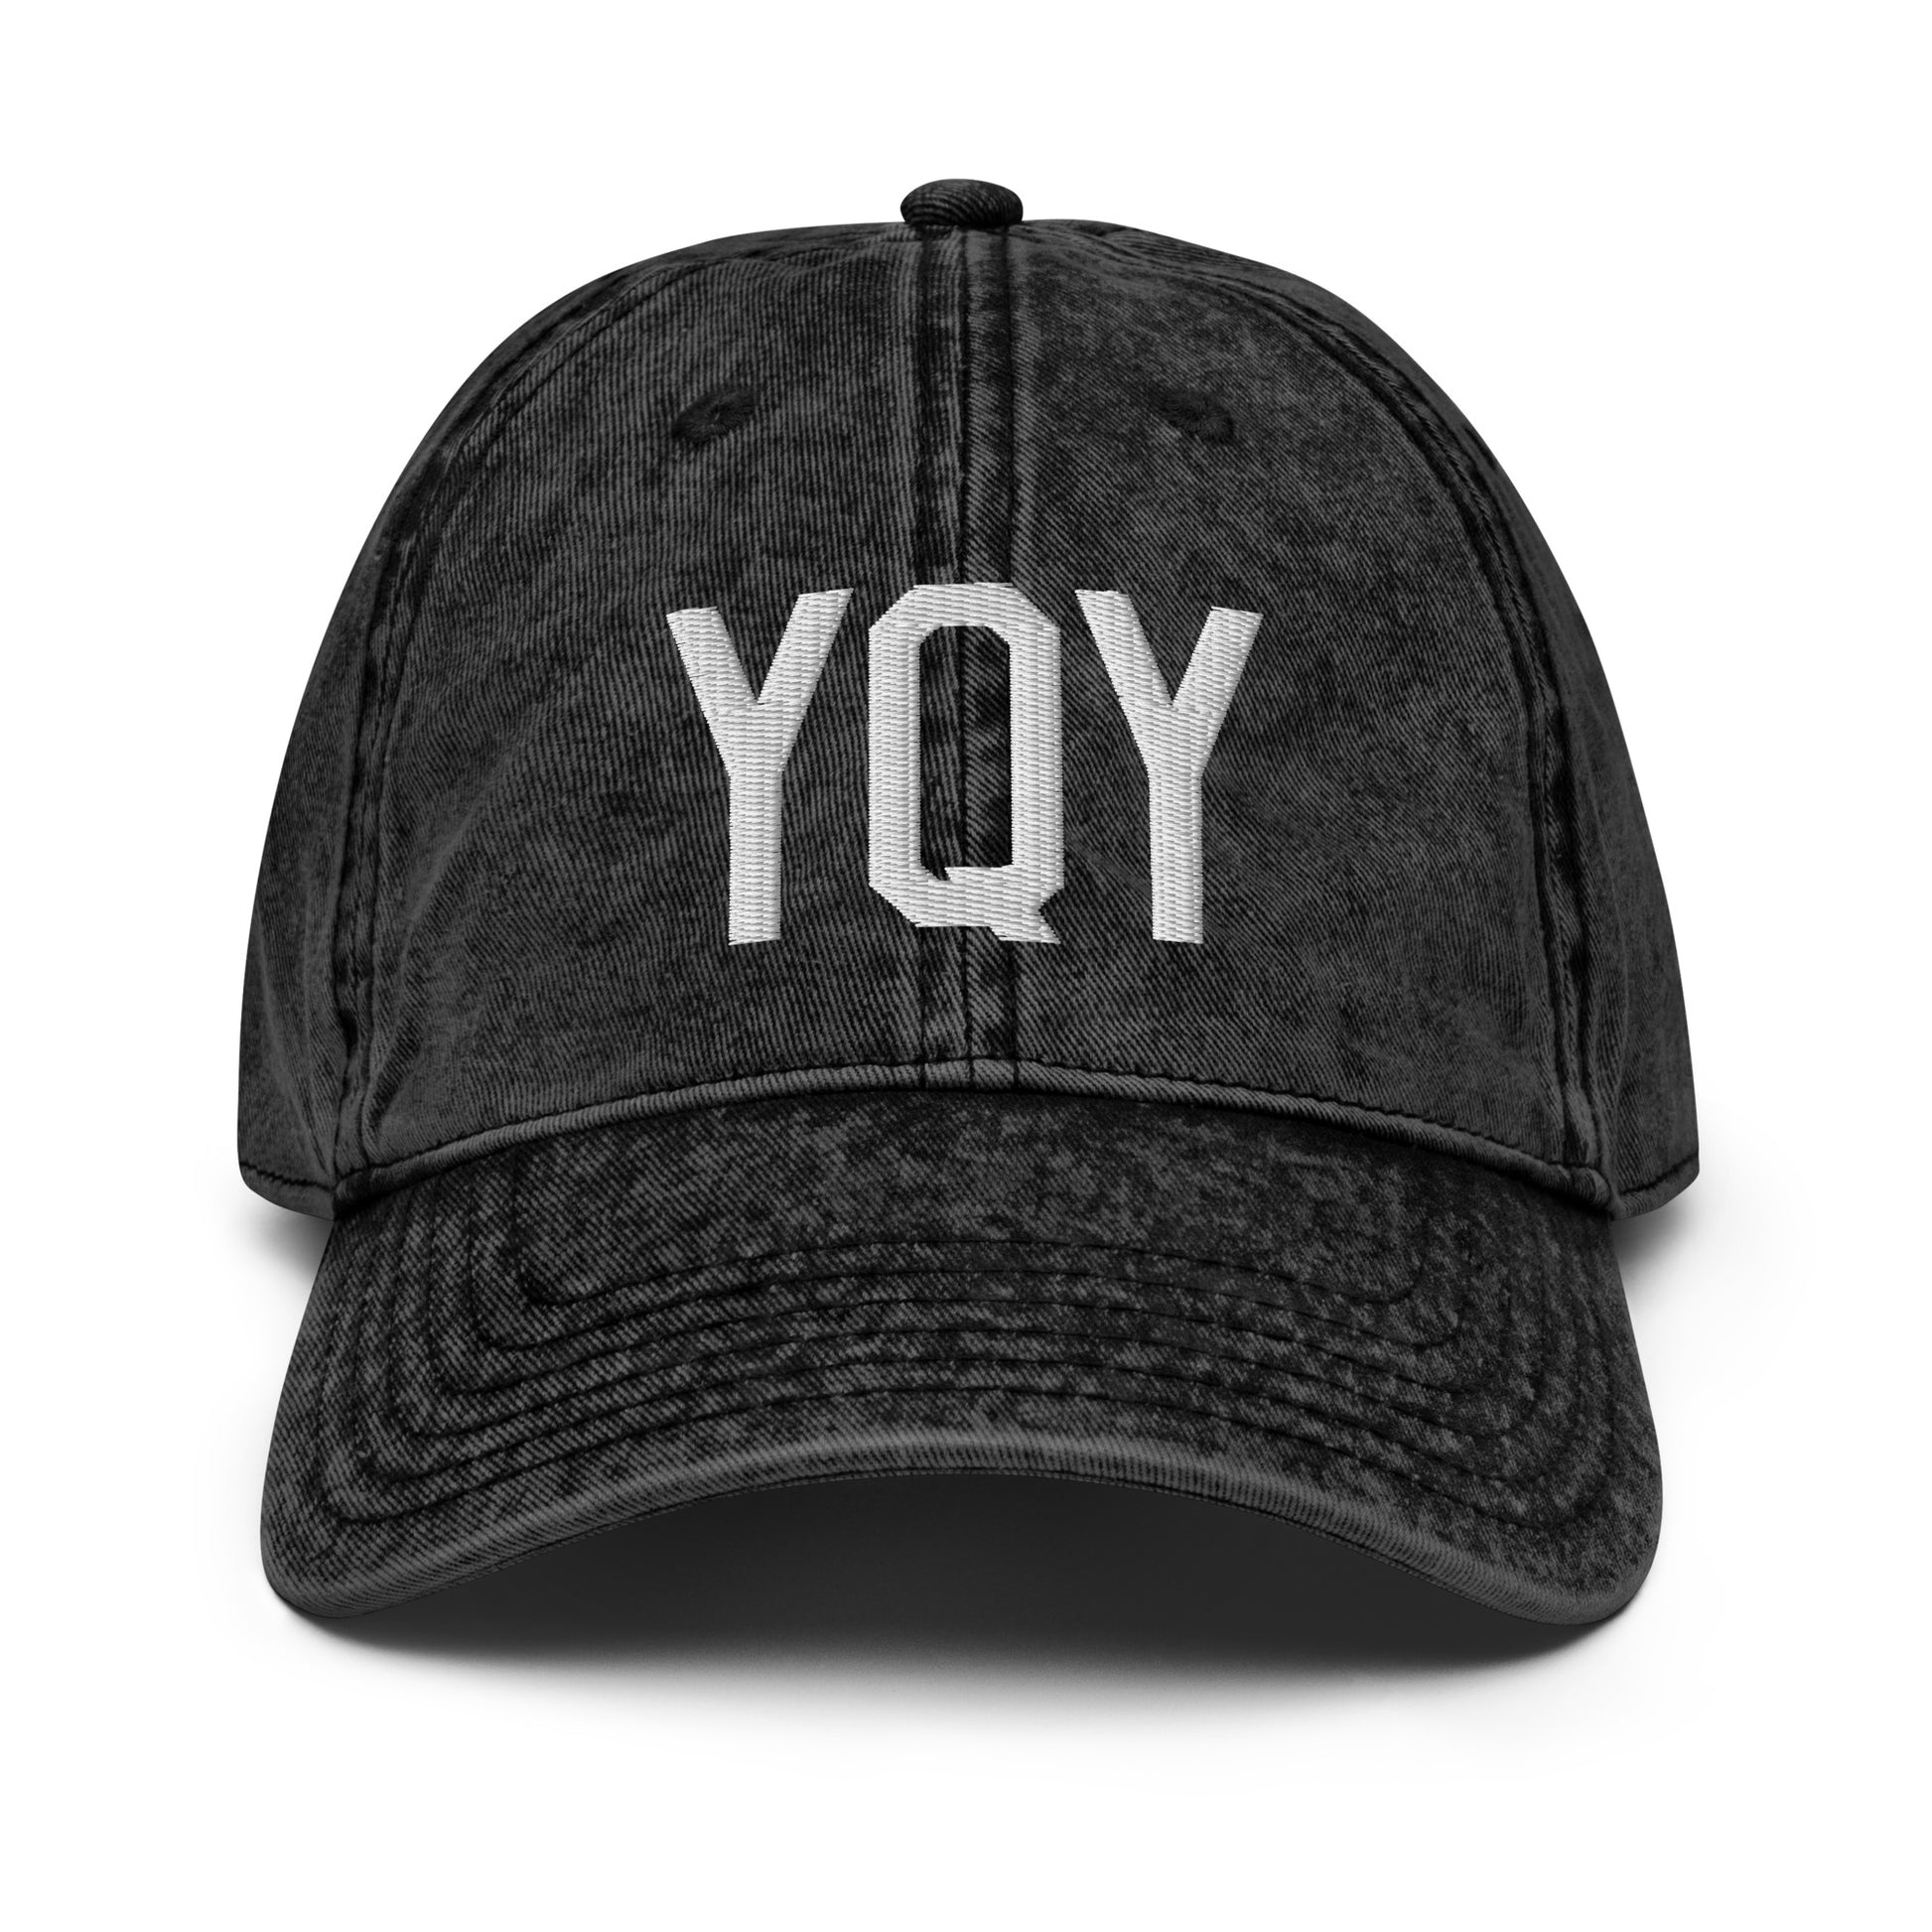 Airport Code Twill Cap - White • YQY Sydney • YHM Designs - Image 14